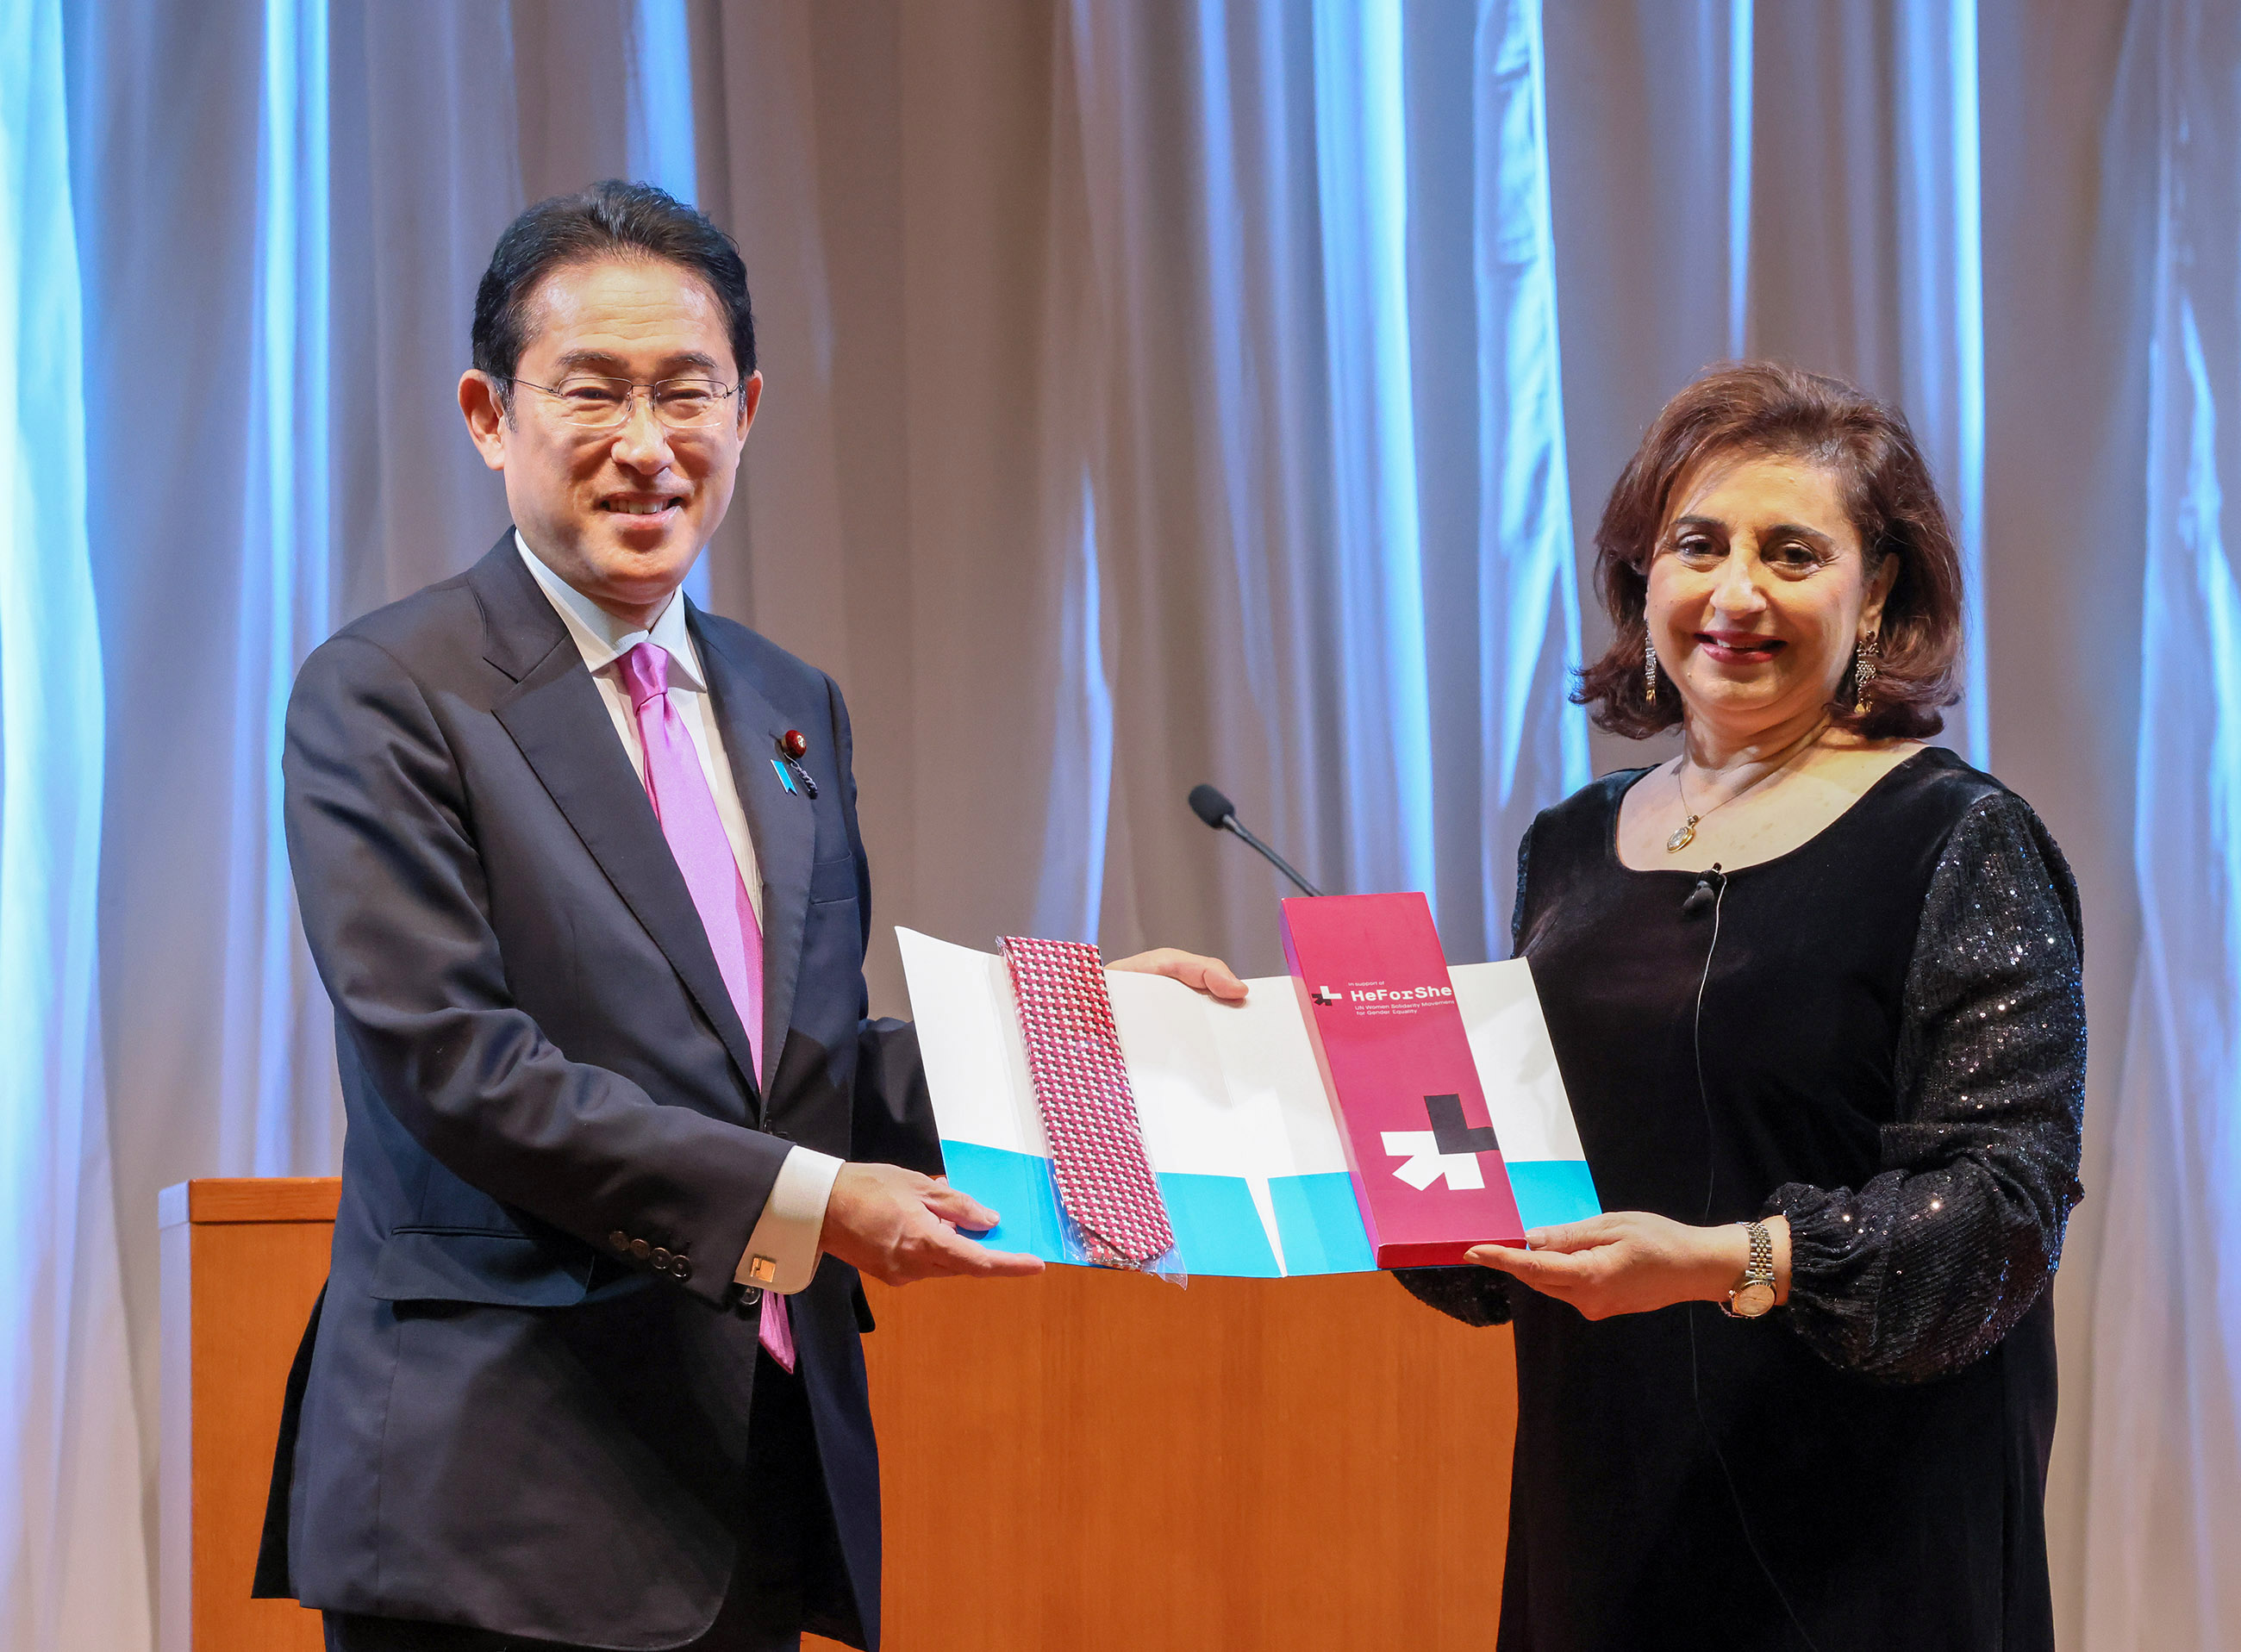 Prime Minister Kishida receiving a gift from Ms. Sima Bahous, Executive Director of UN Women (2)